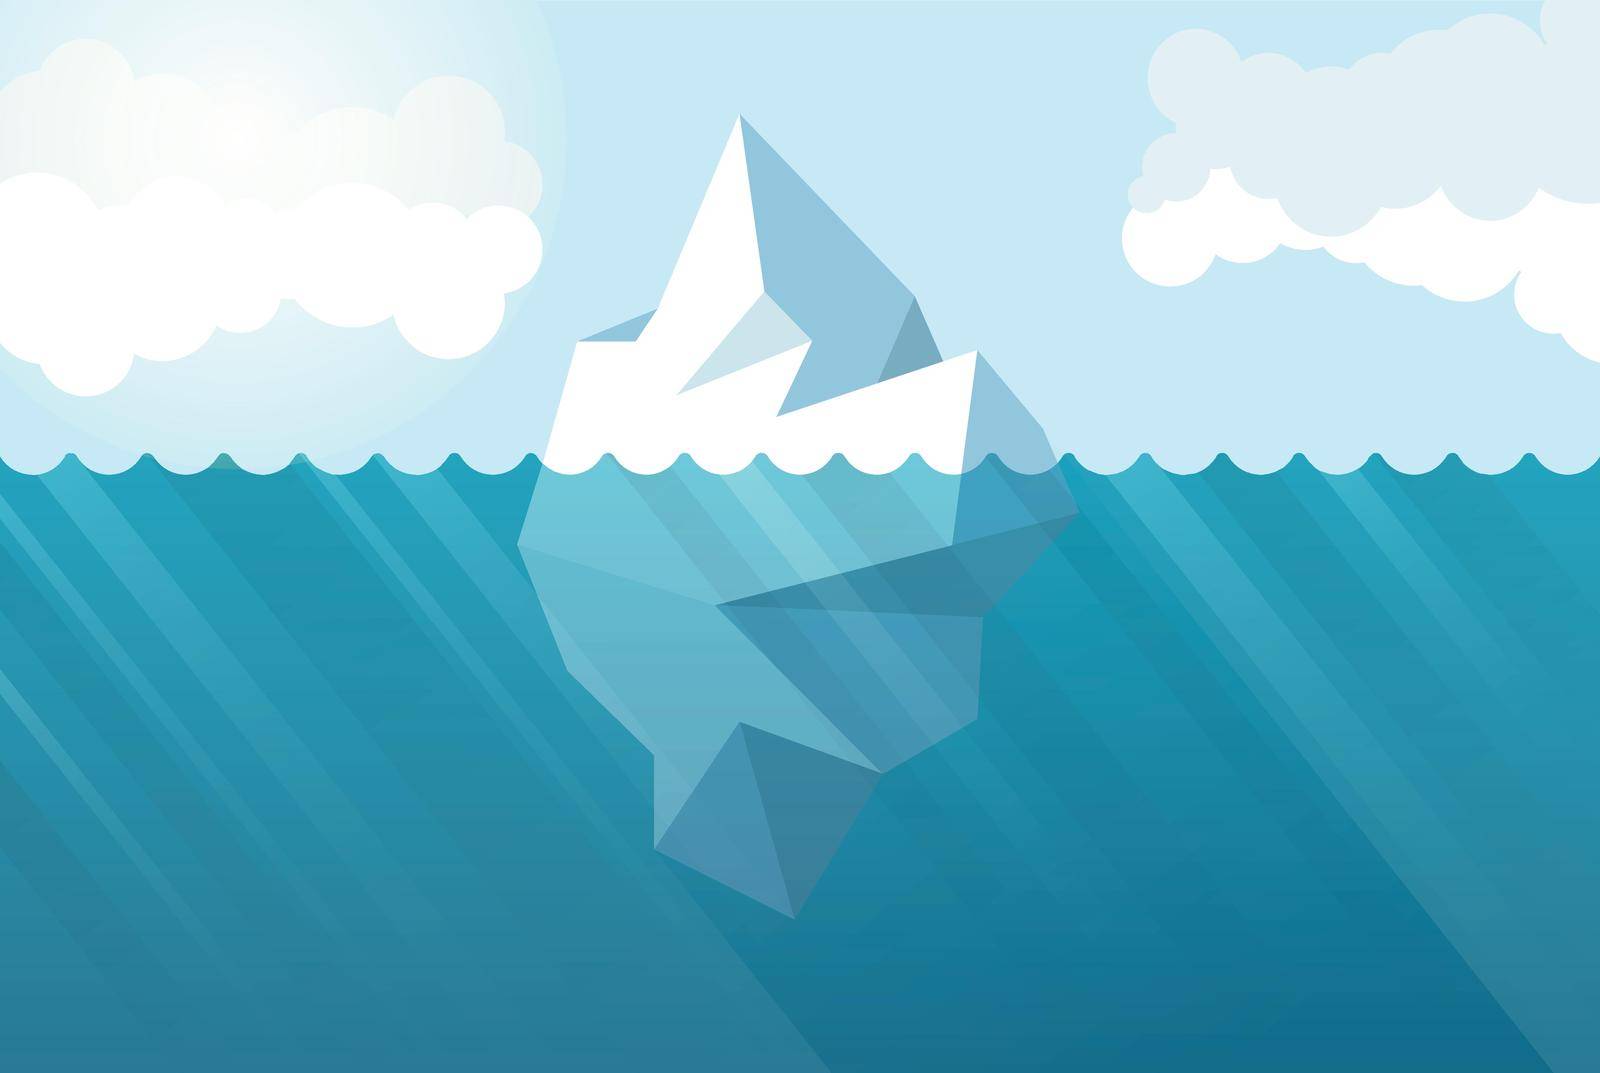 Underwater iceberg icon in flat style. Berg seascape vector illustration on isolated background. Antarctica ecology sign business concept.